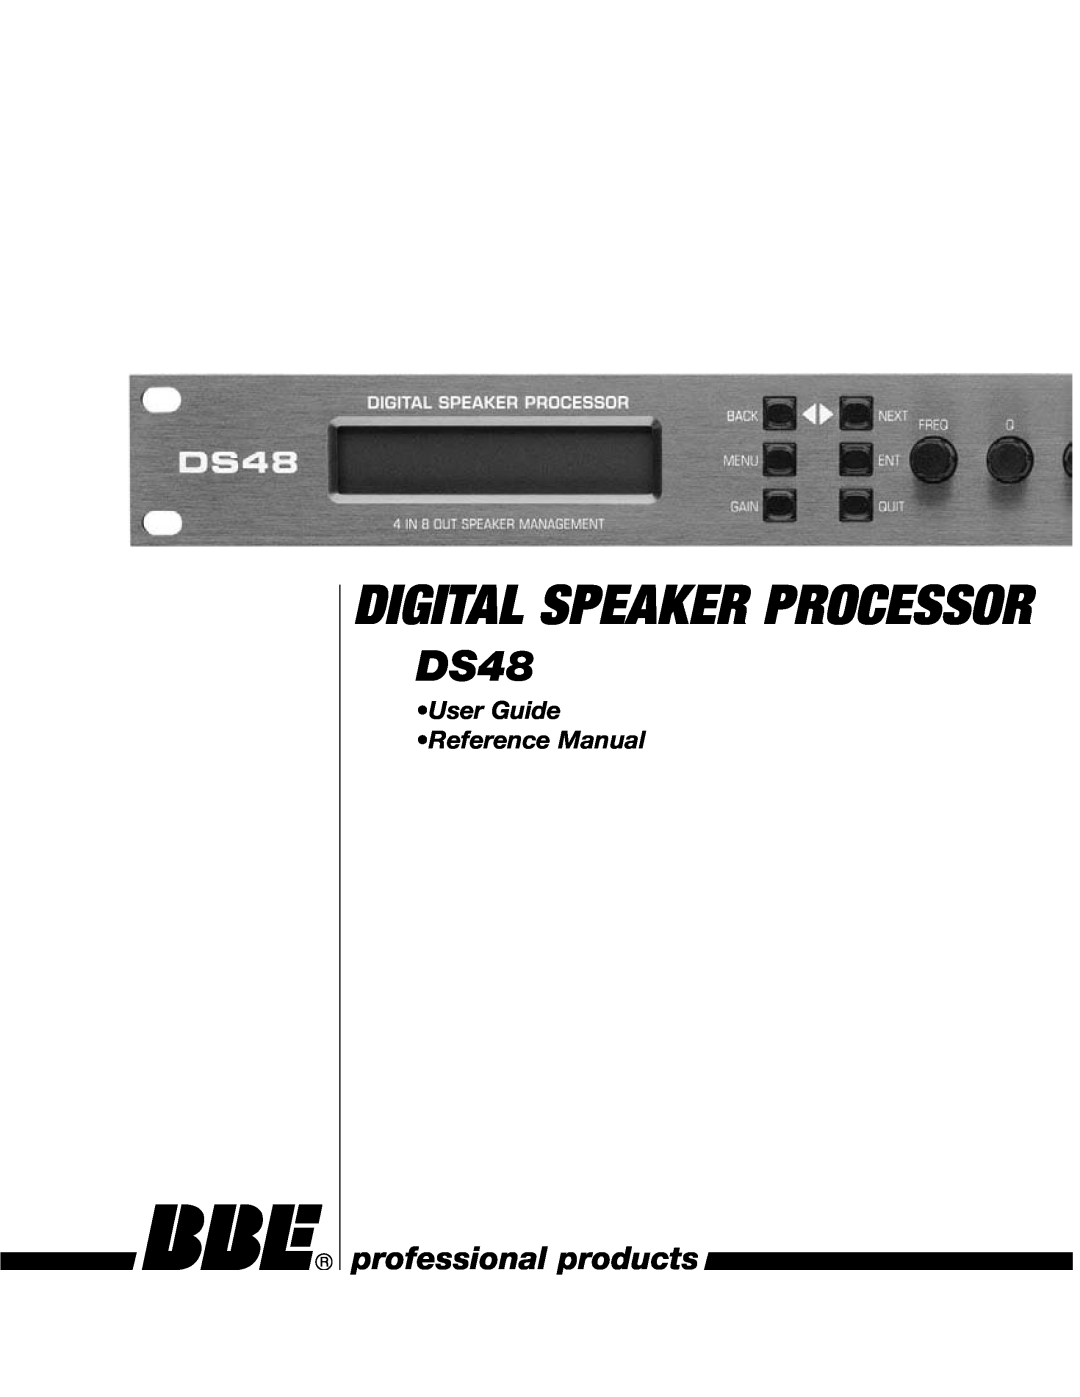 BBE DS48 manual professional products, User Guide Reference Manual, Digital Speaker Processor 